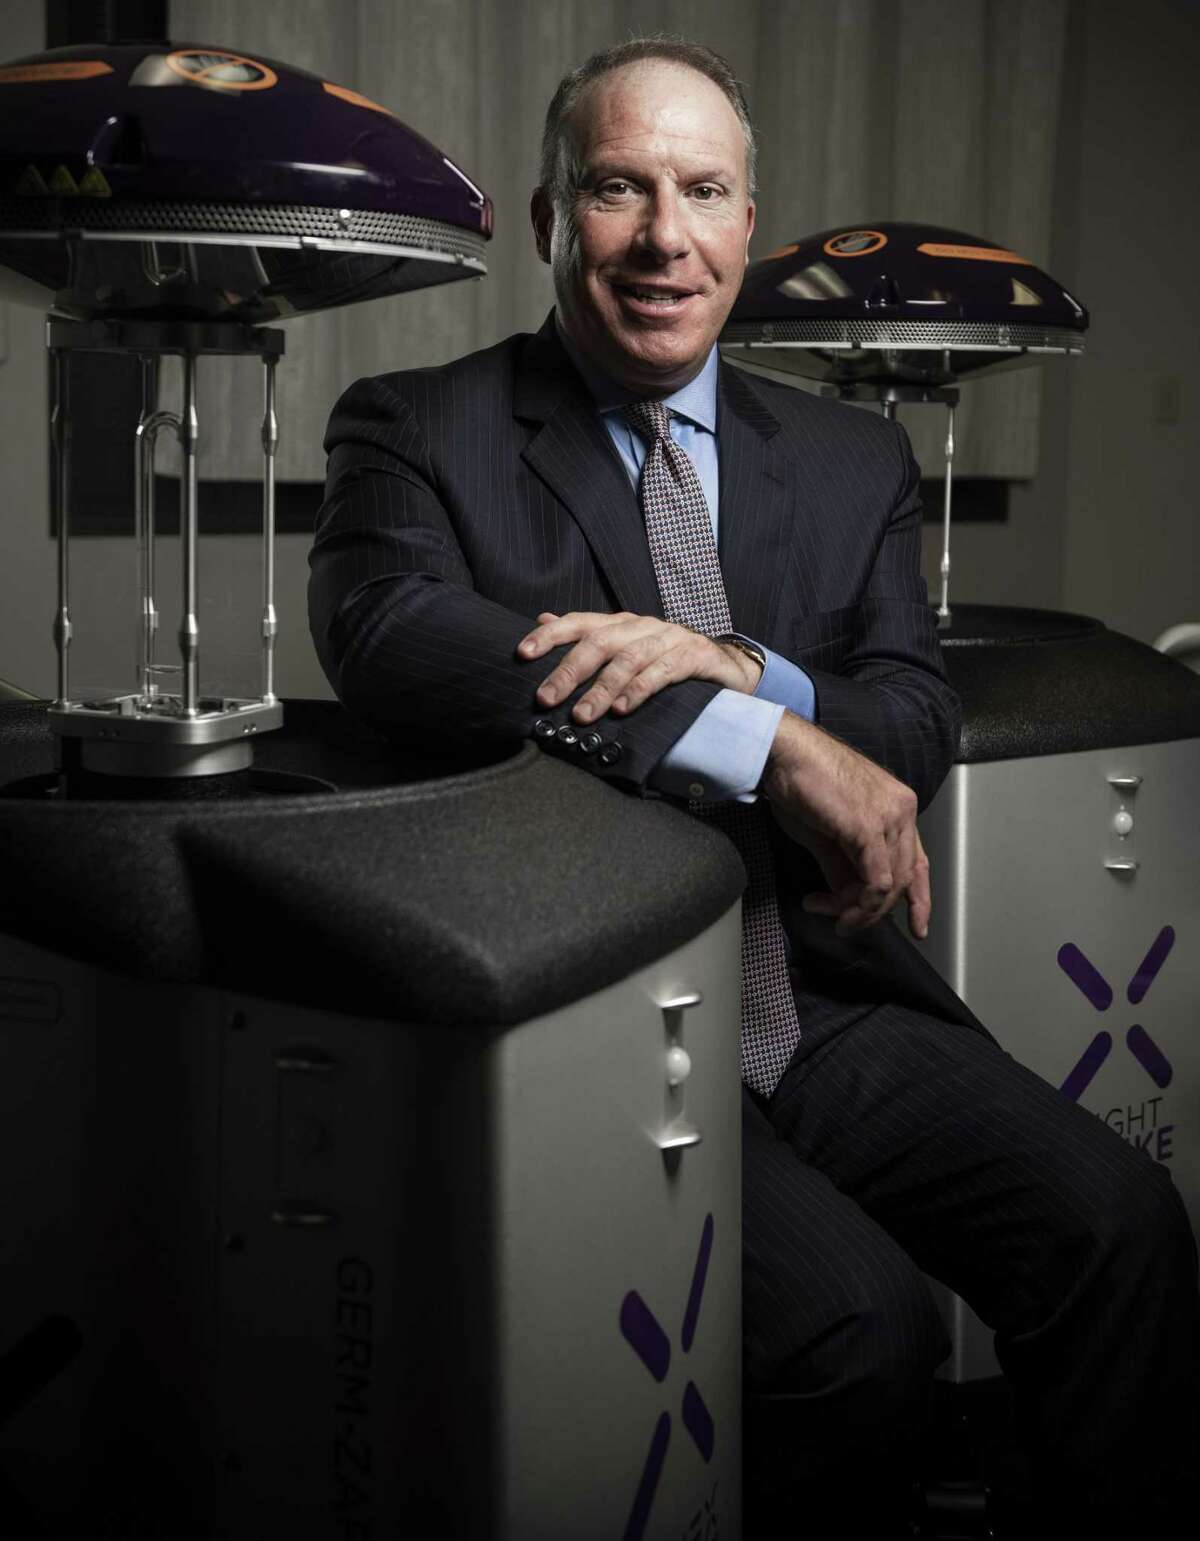 Morris Miller currently is CEO of Xenex Disinfection Systems, which sells robots used to disinfect hospital rooms, and a managing partner at Tectonic Ventures, a venture capital firm that’s invested in Xenex, Kymeta, Humatics and other technology businesses.